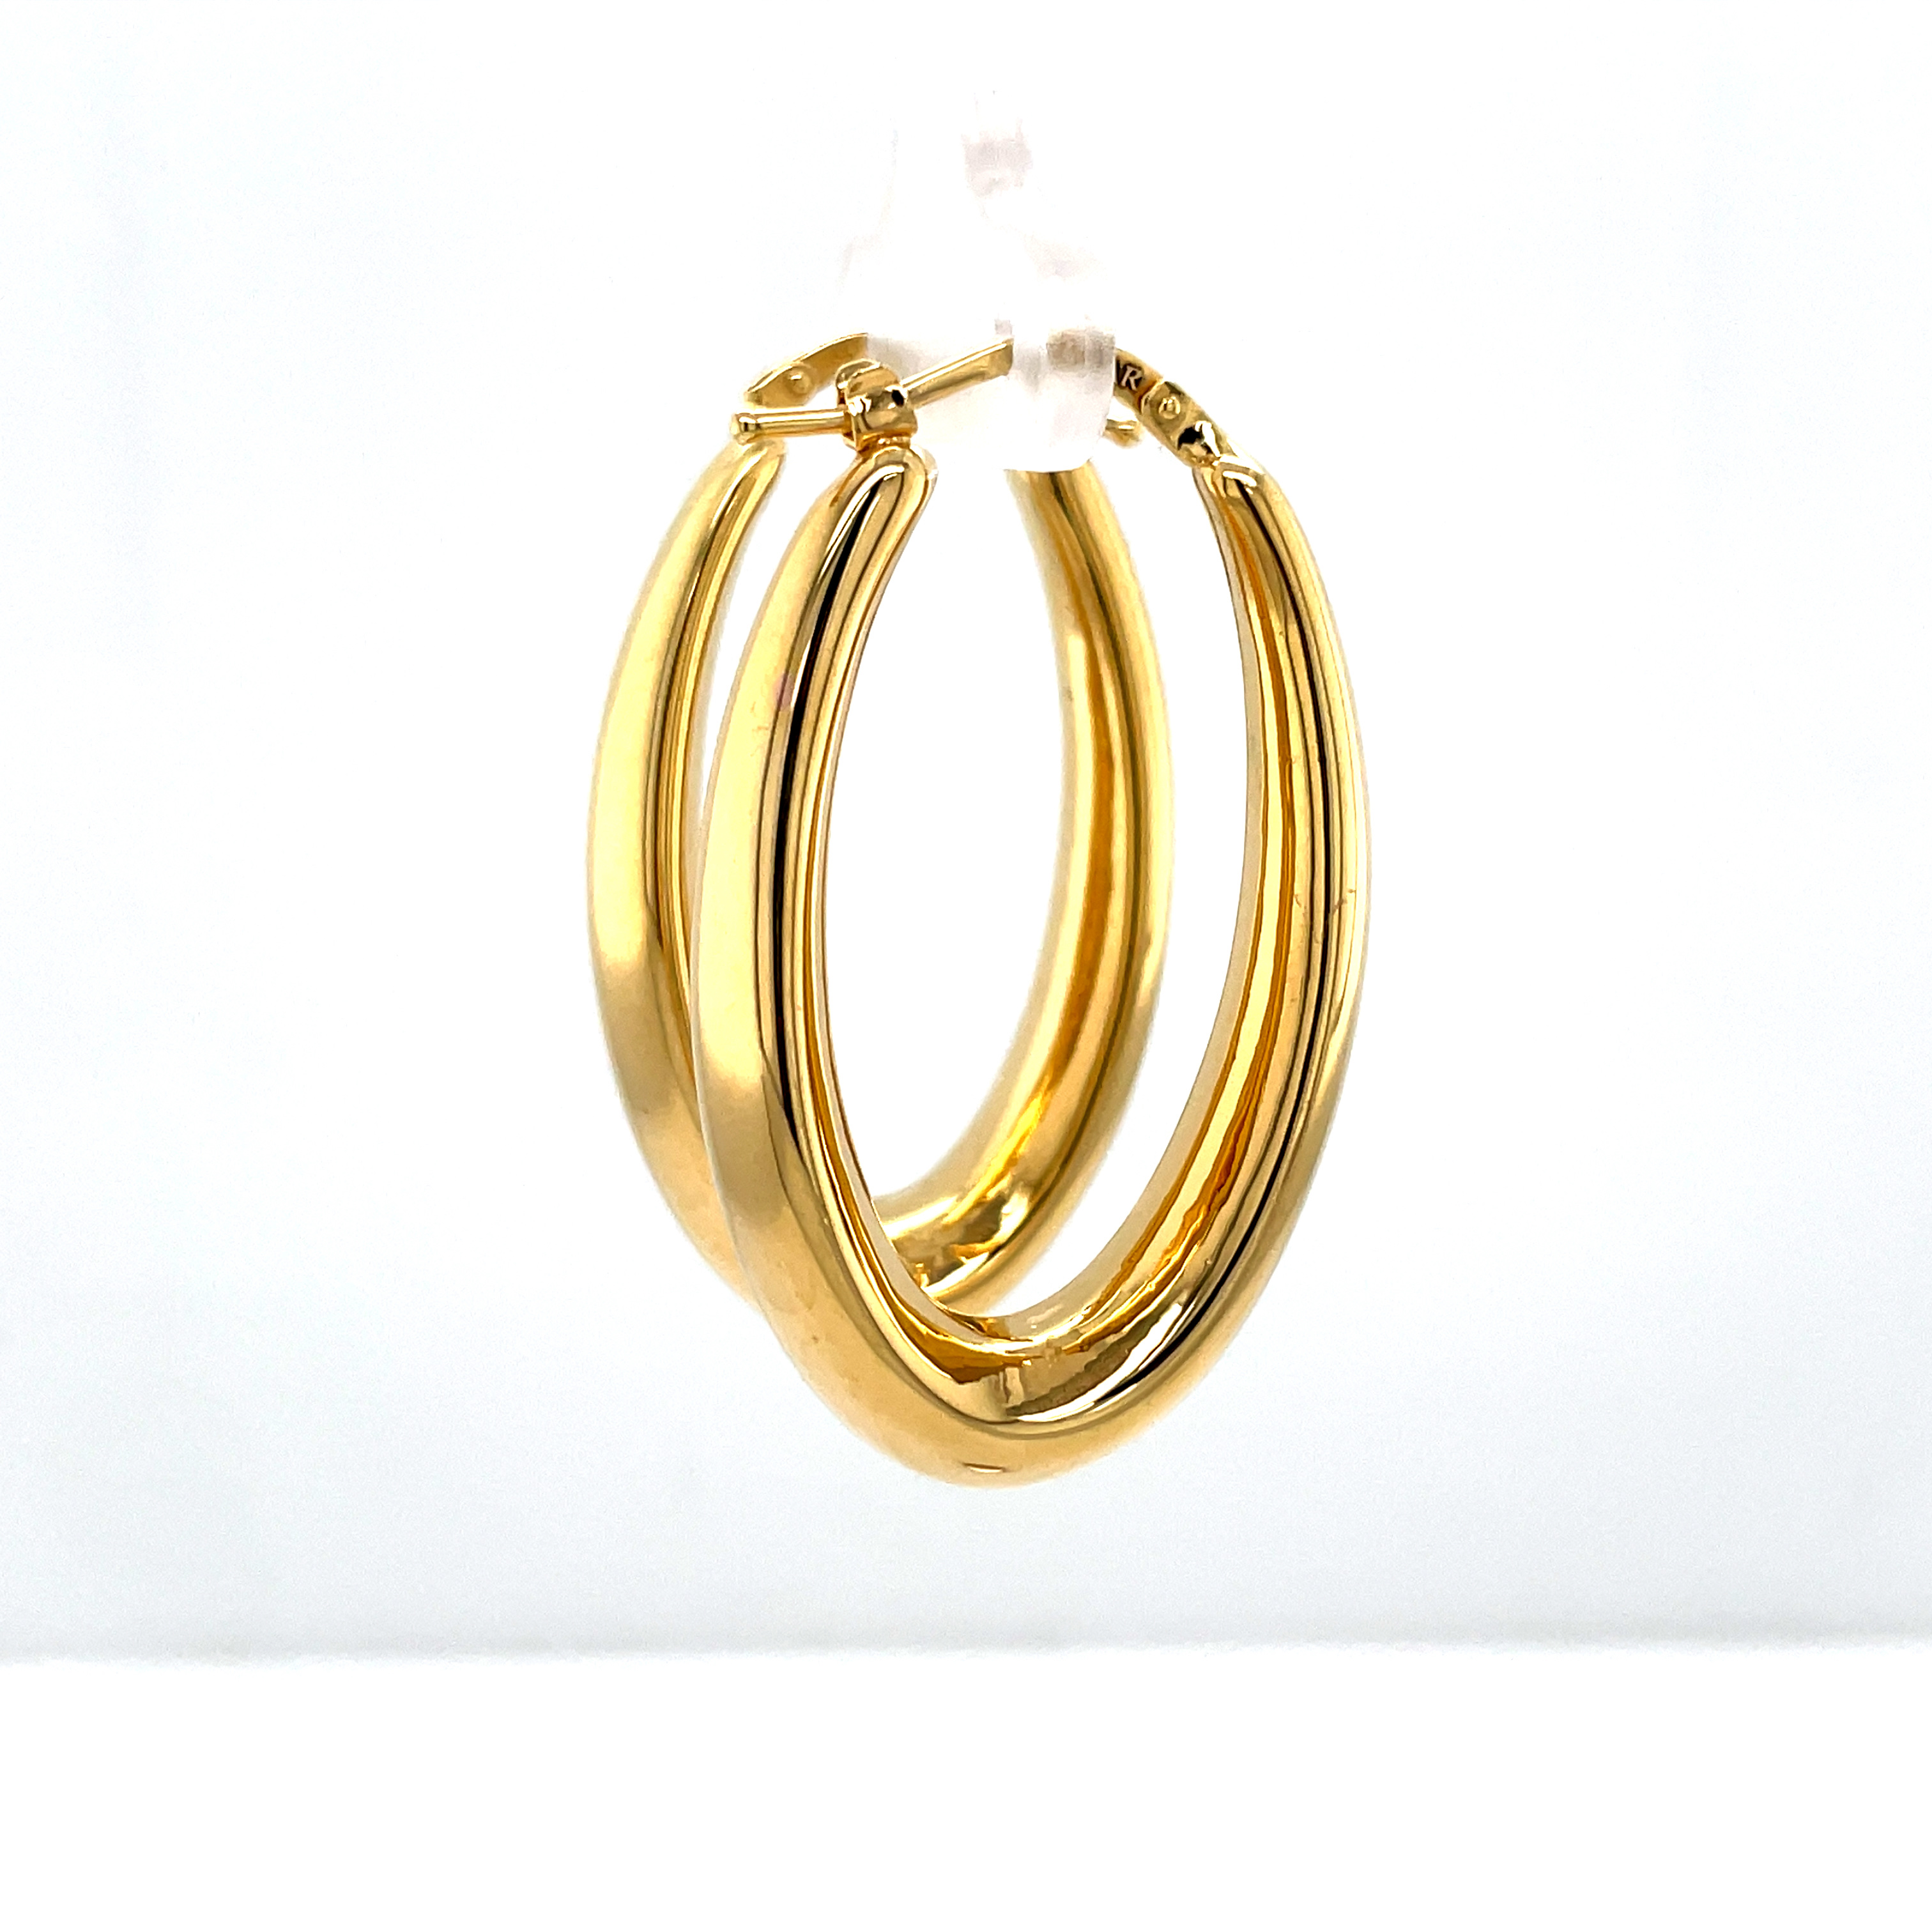 14k yellow gold.  Italian made  Secure hinged system   Large hoops   1.5" inches long